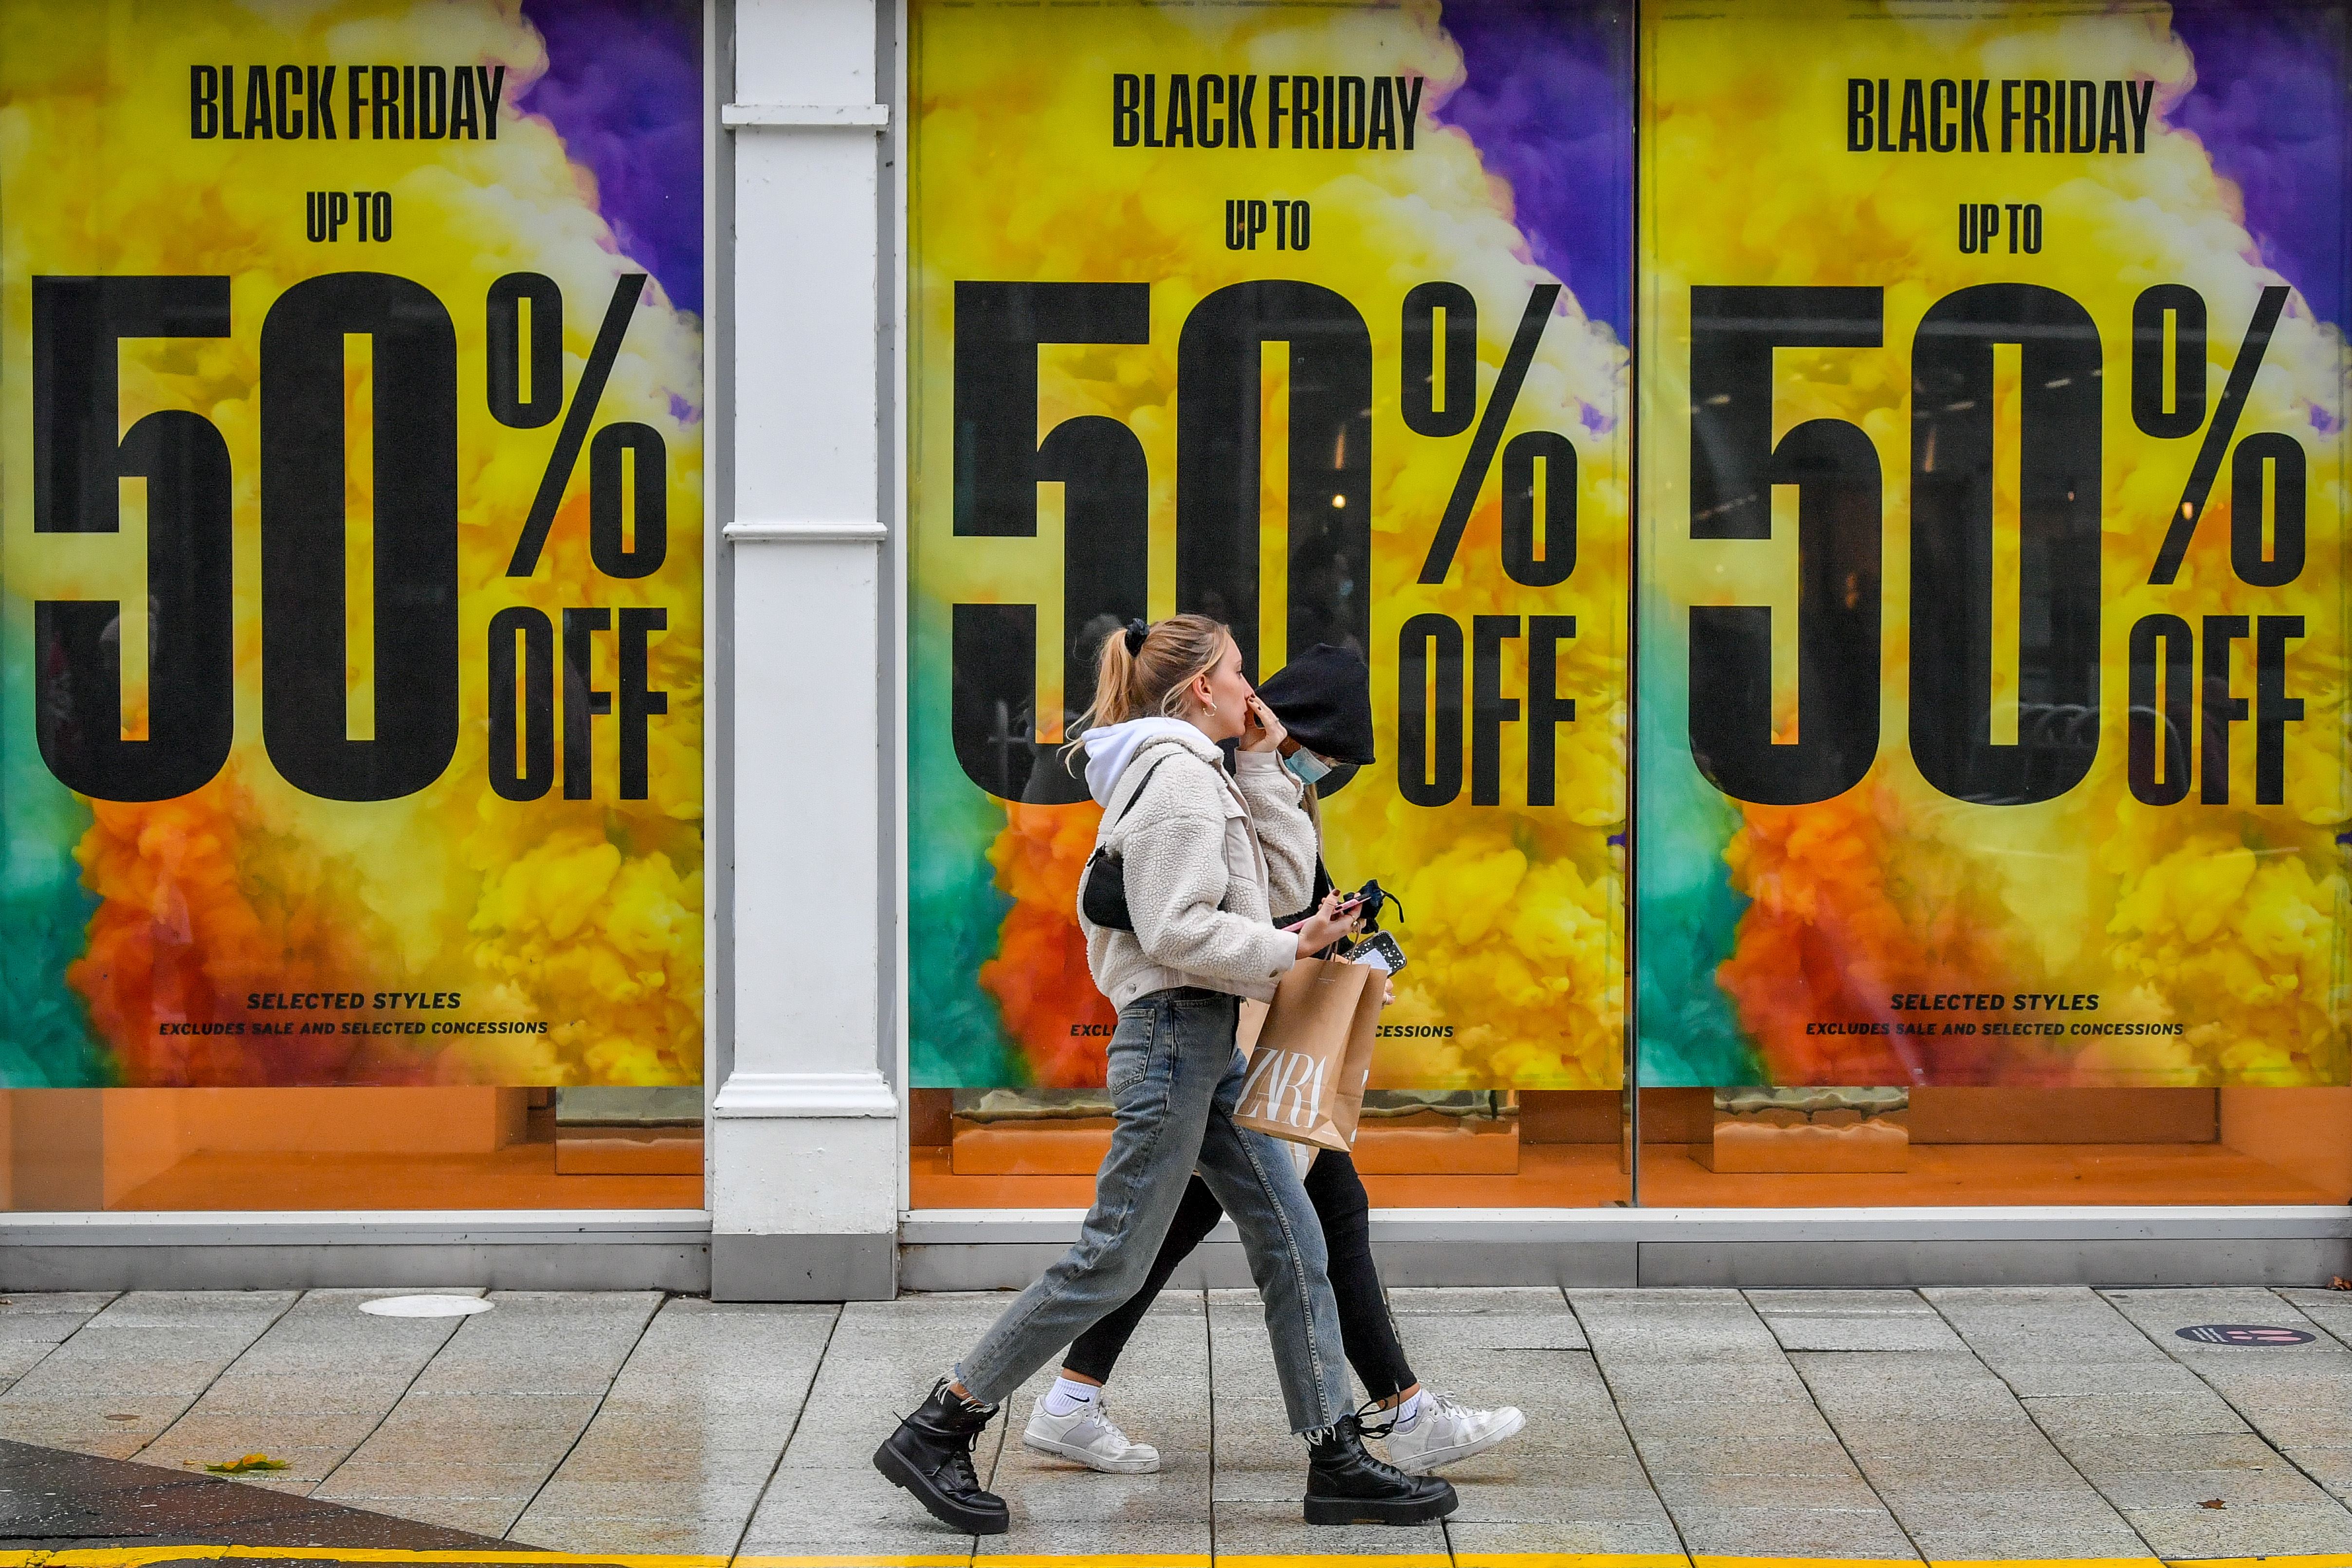 Online retailers prepare for ‘biggest Black Friday’ as stores stay shut - What Stores Have The Biggest Black Friday Sales